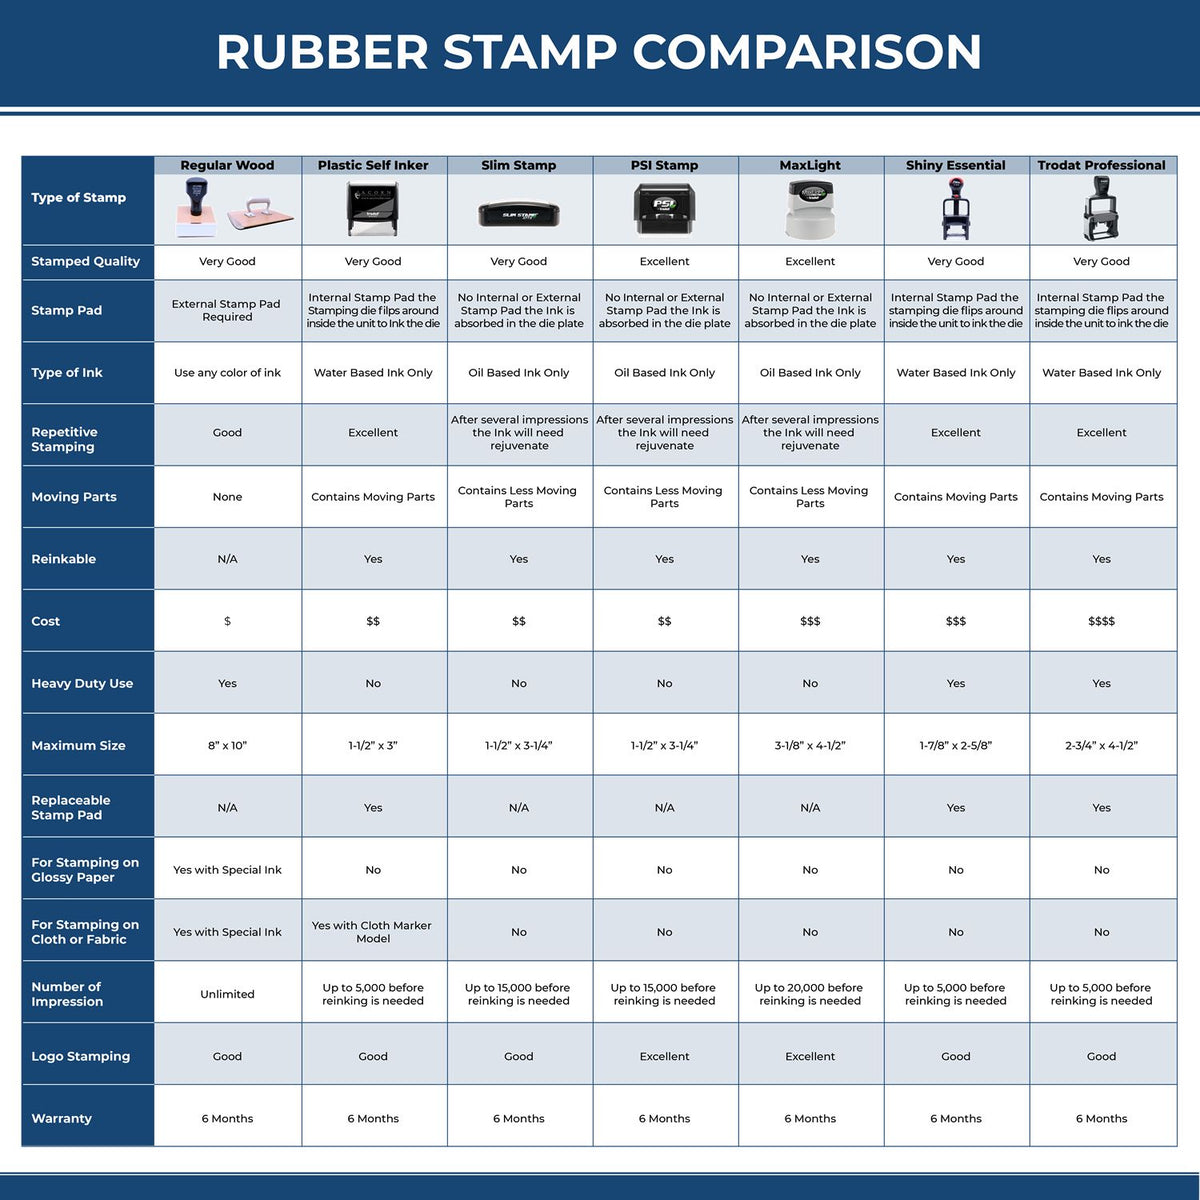 Xstamper Professional Pre-Inked Rubber Stamp of Seal 3038 Rubber Stamp Comparison